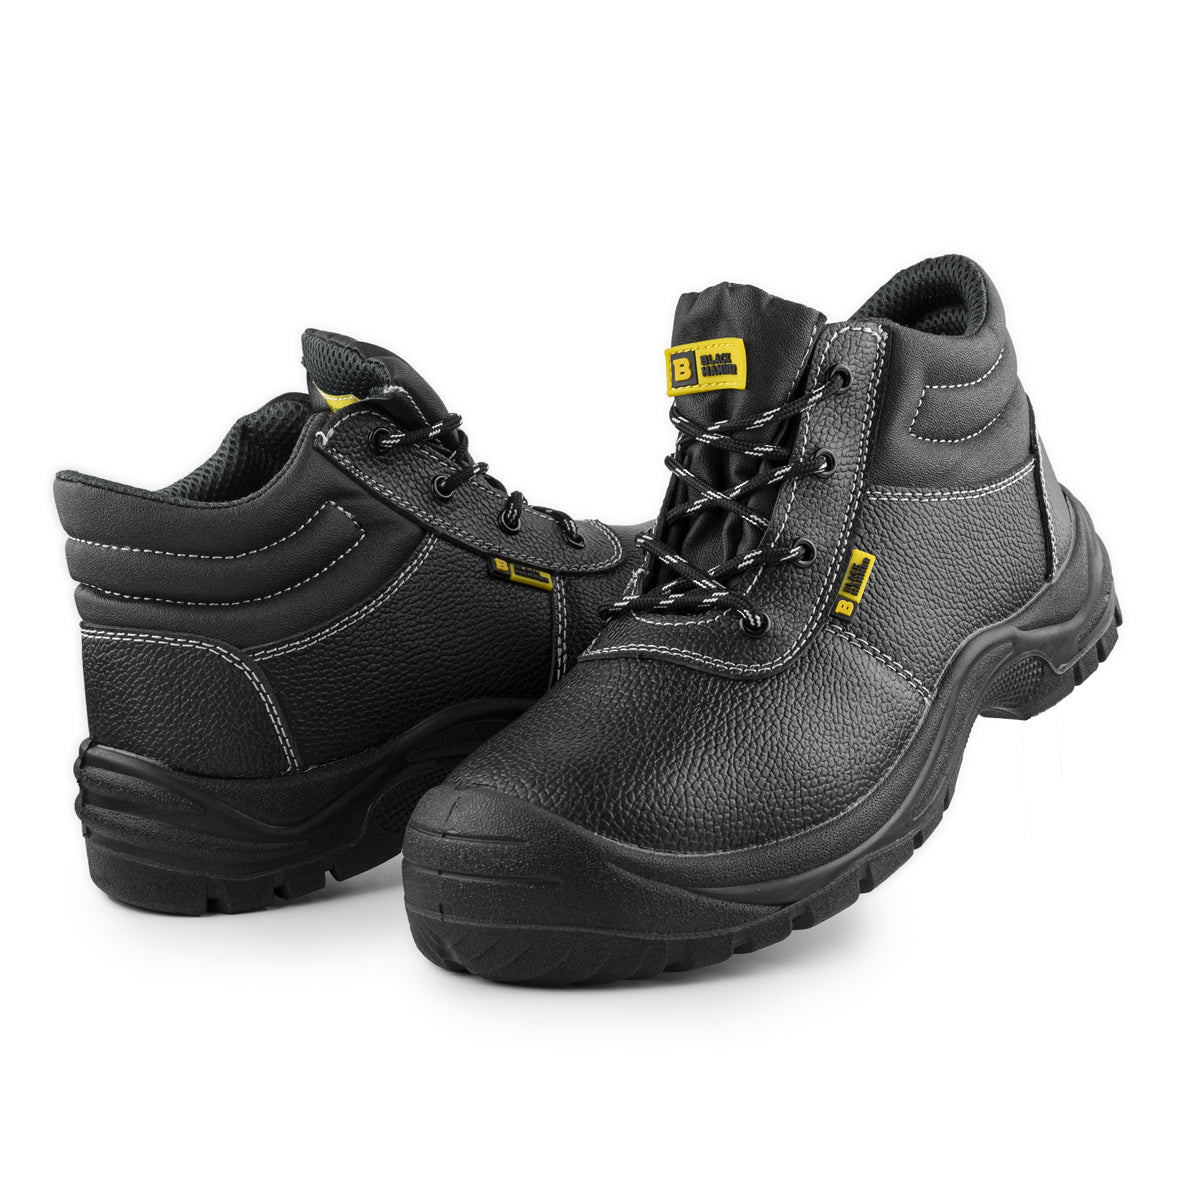 Safety Steel Toe Boots